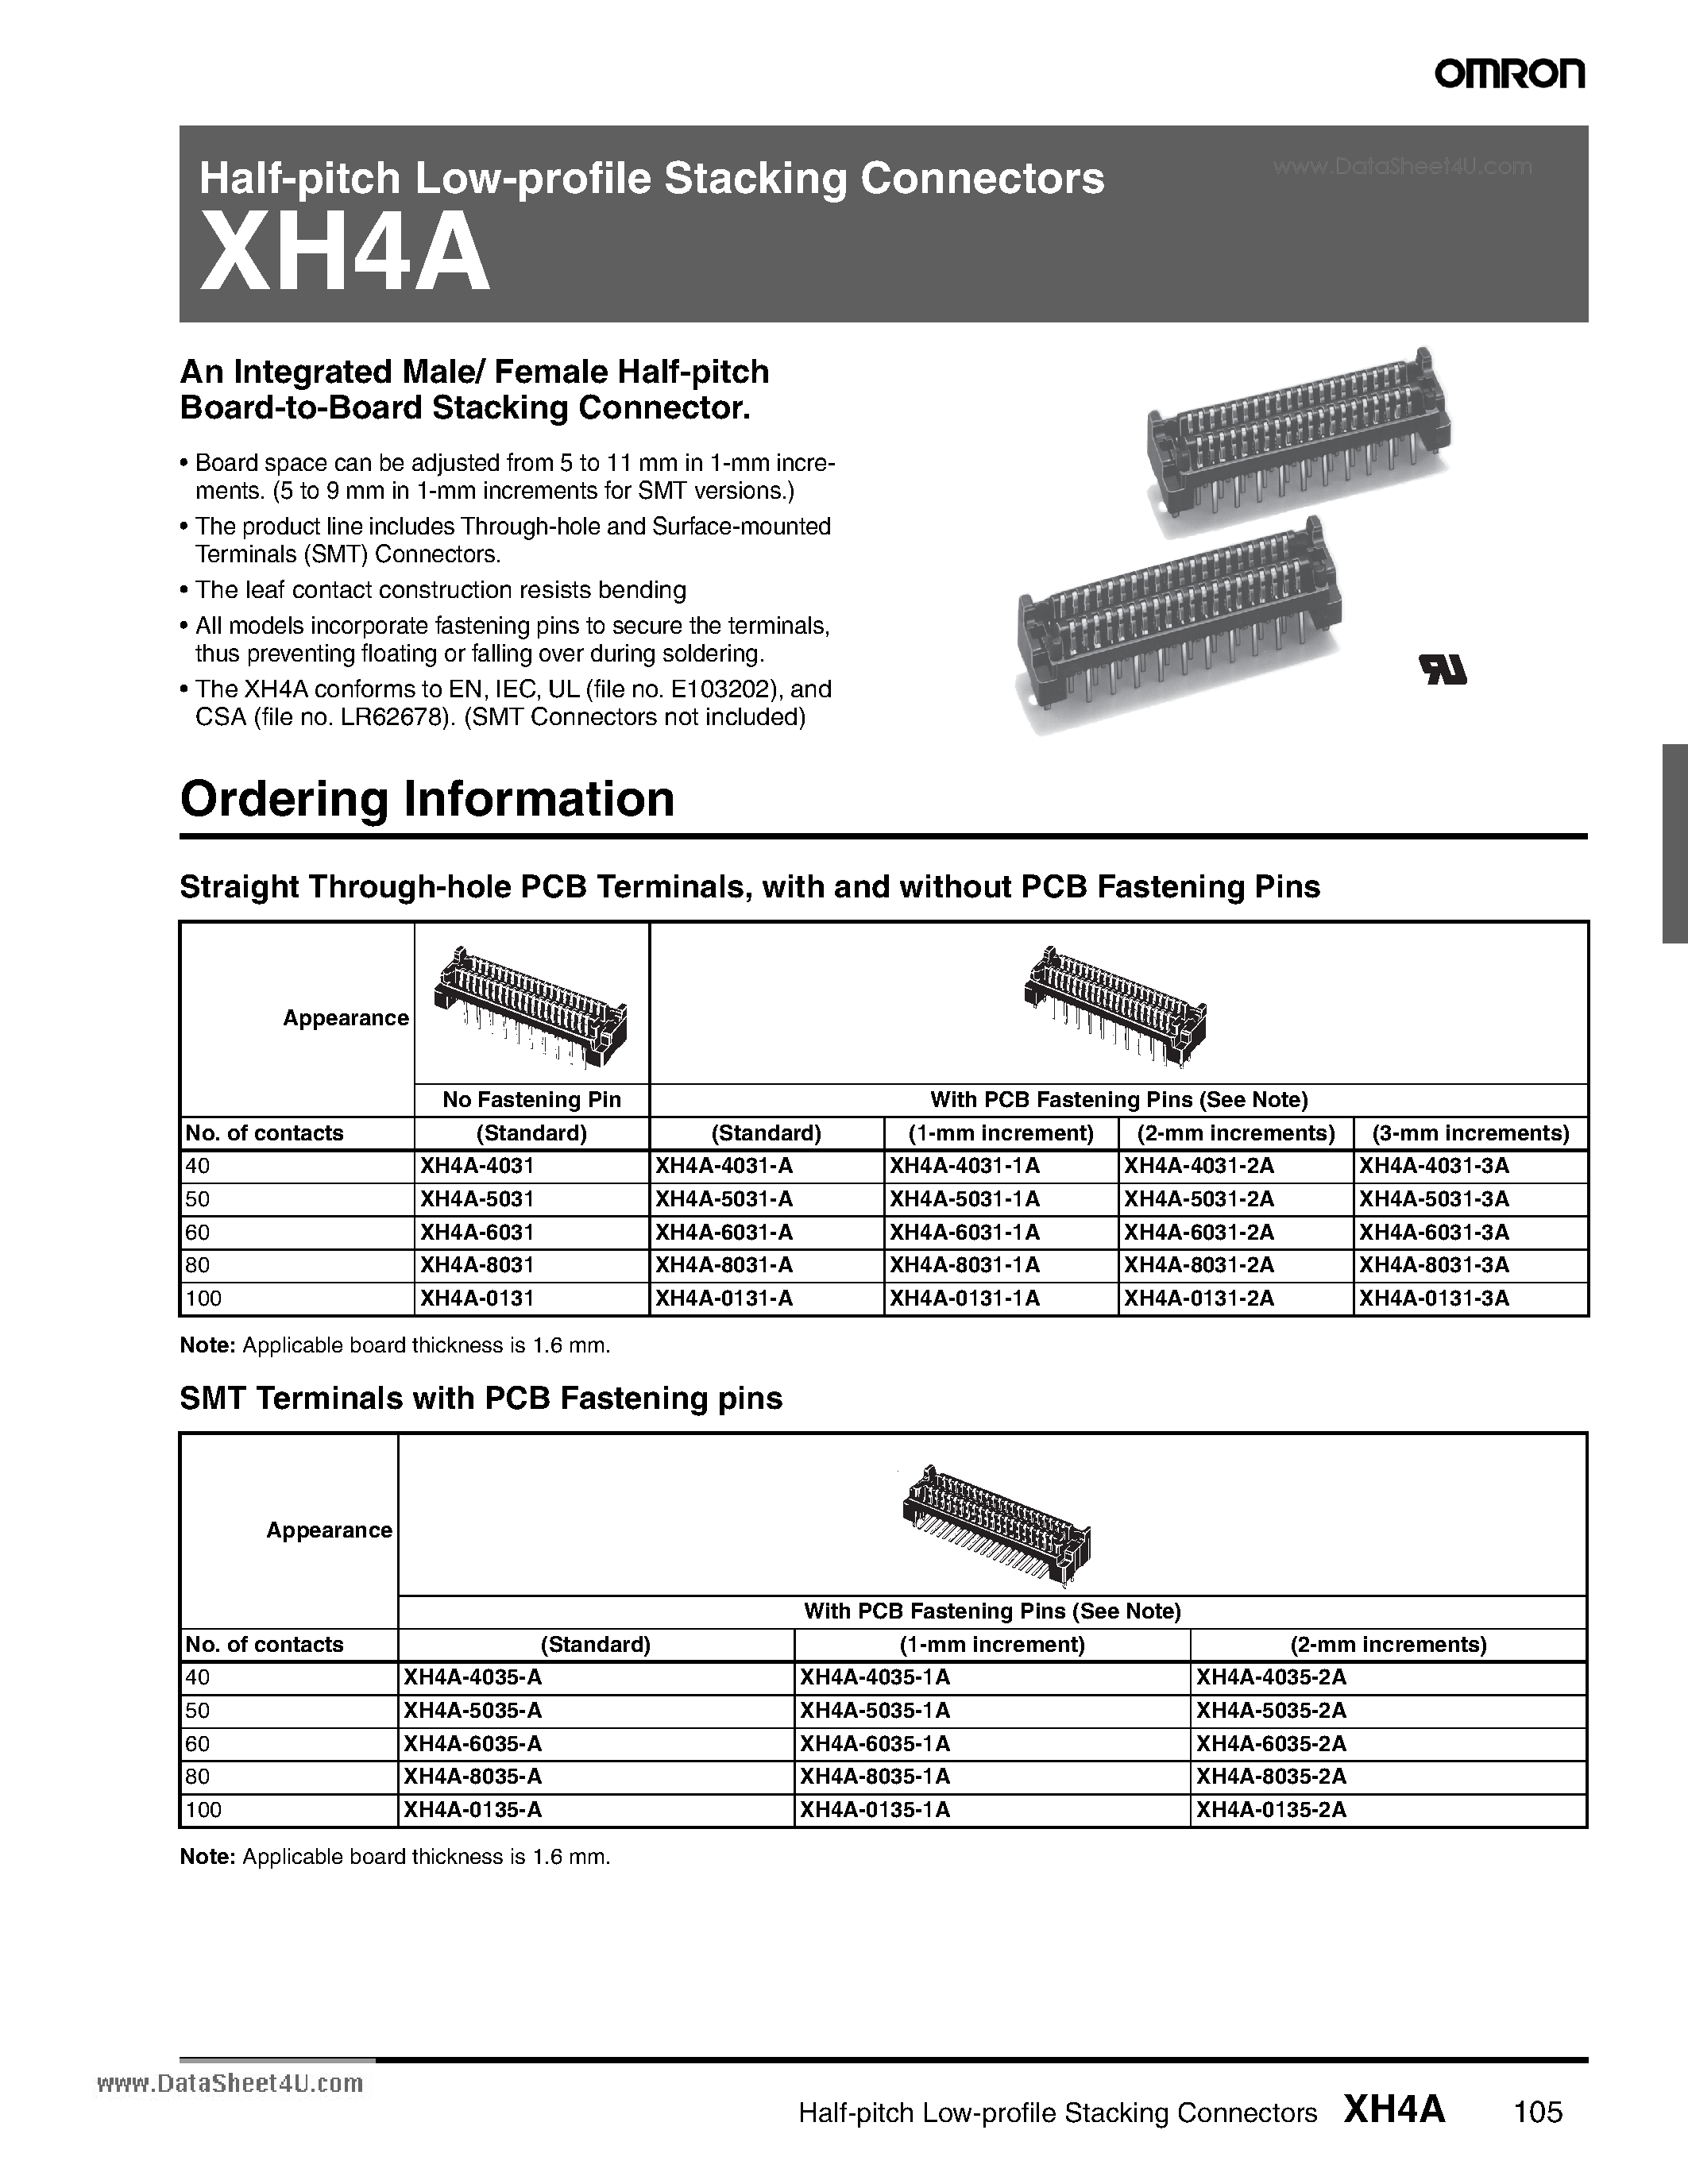 Datasheet XH4A - Half-pitch Low-profile Stacking Connectors page 1